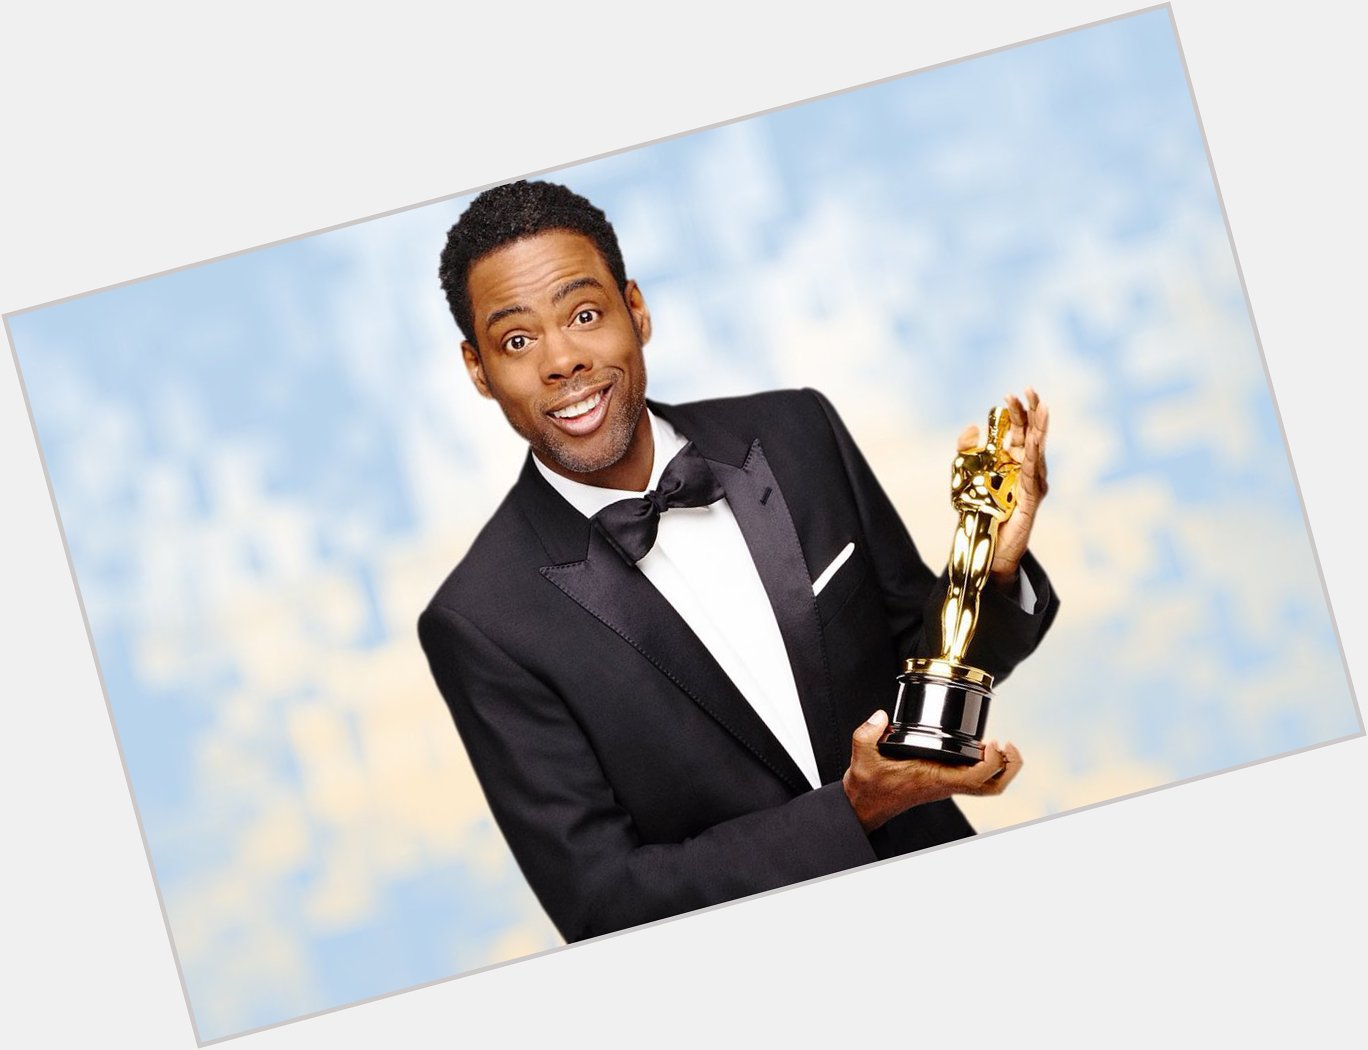 Happy 57th Birthday to comedian, actor, writer, producer and director Chris Rock! 